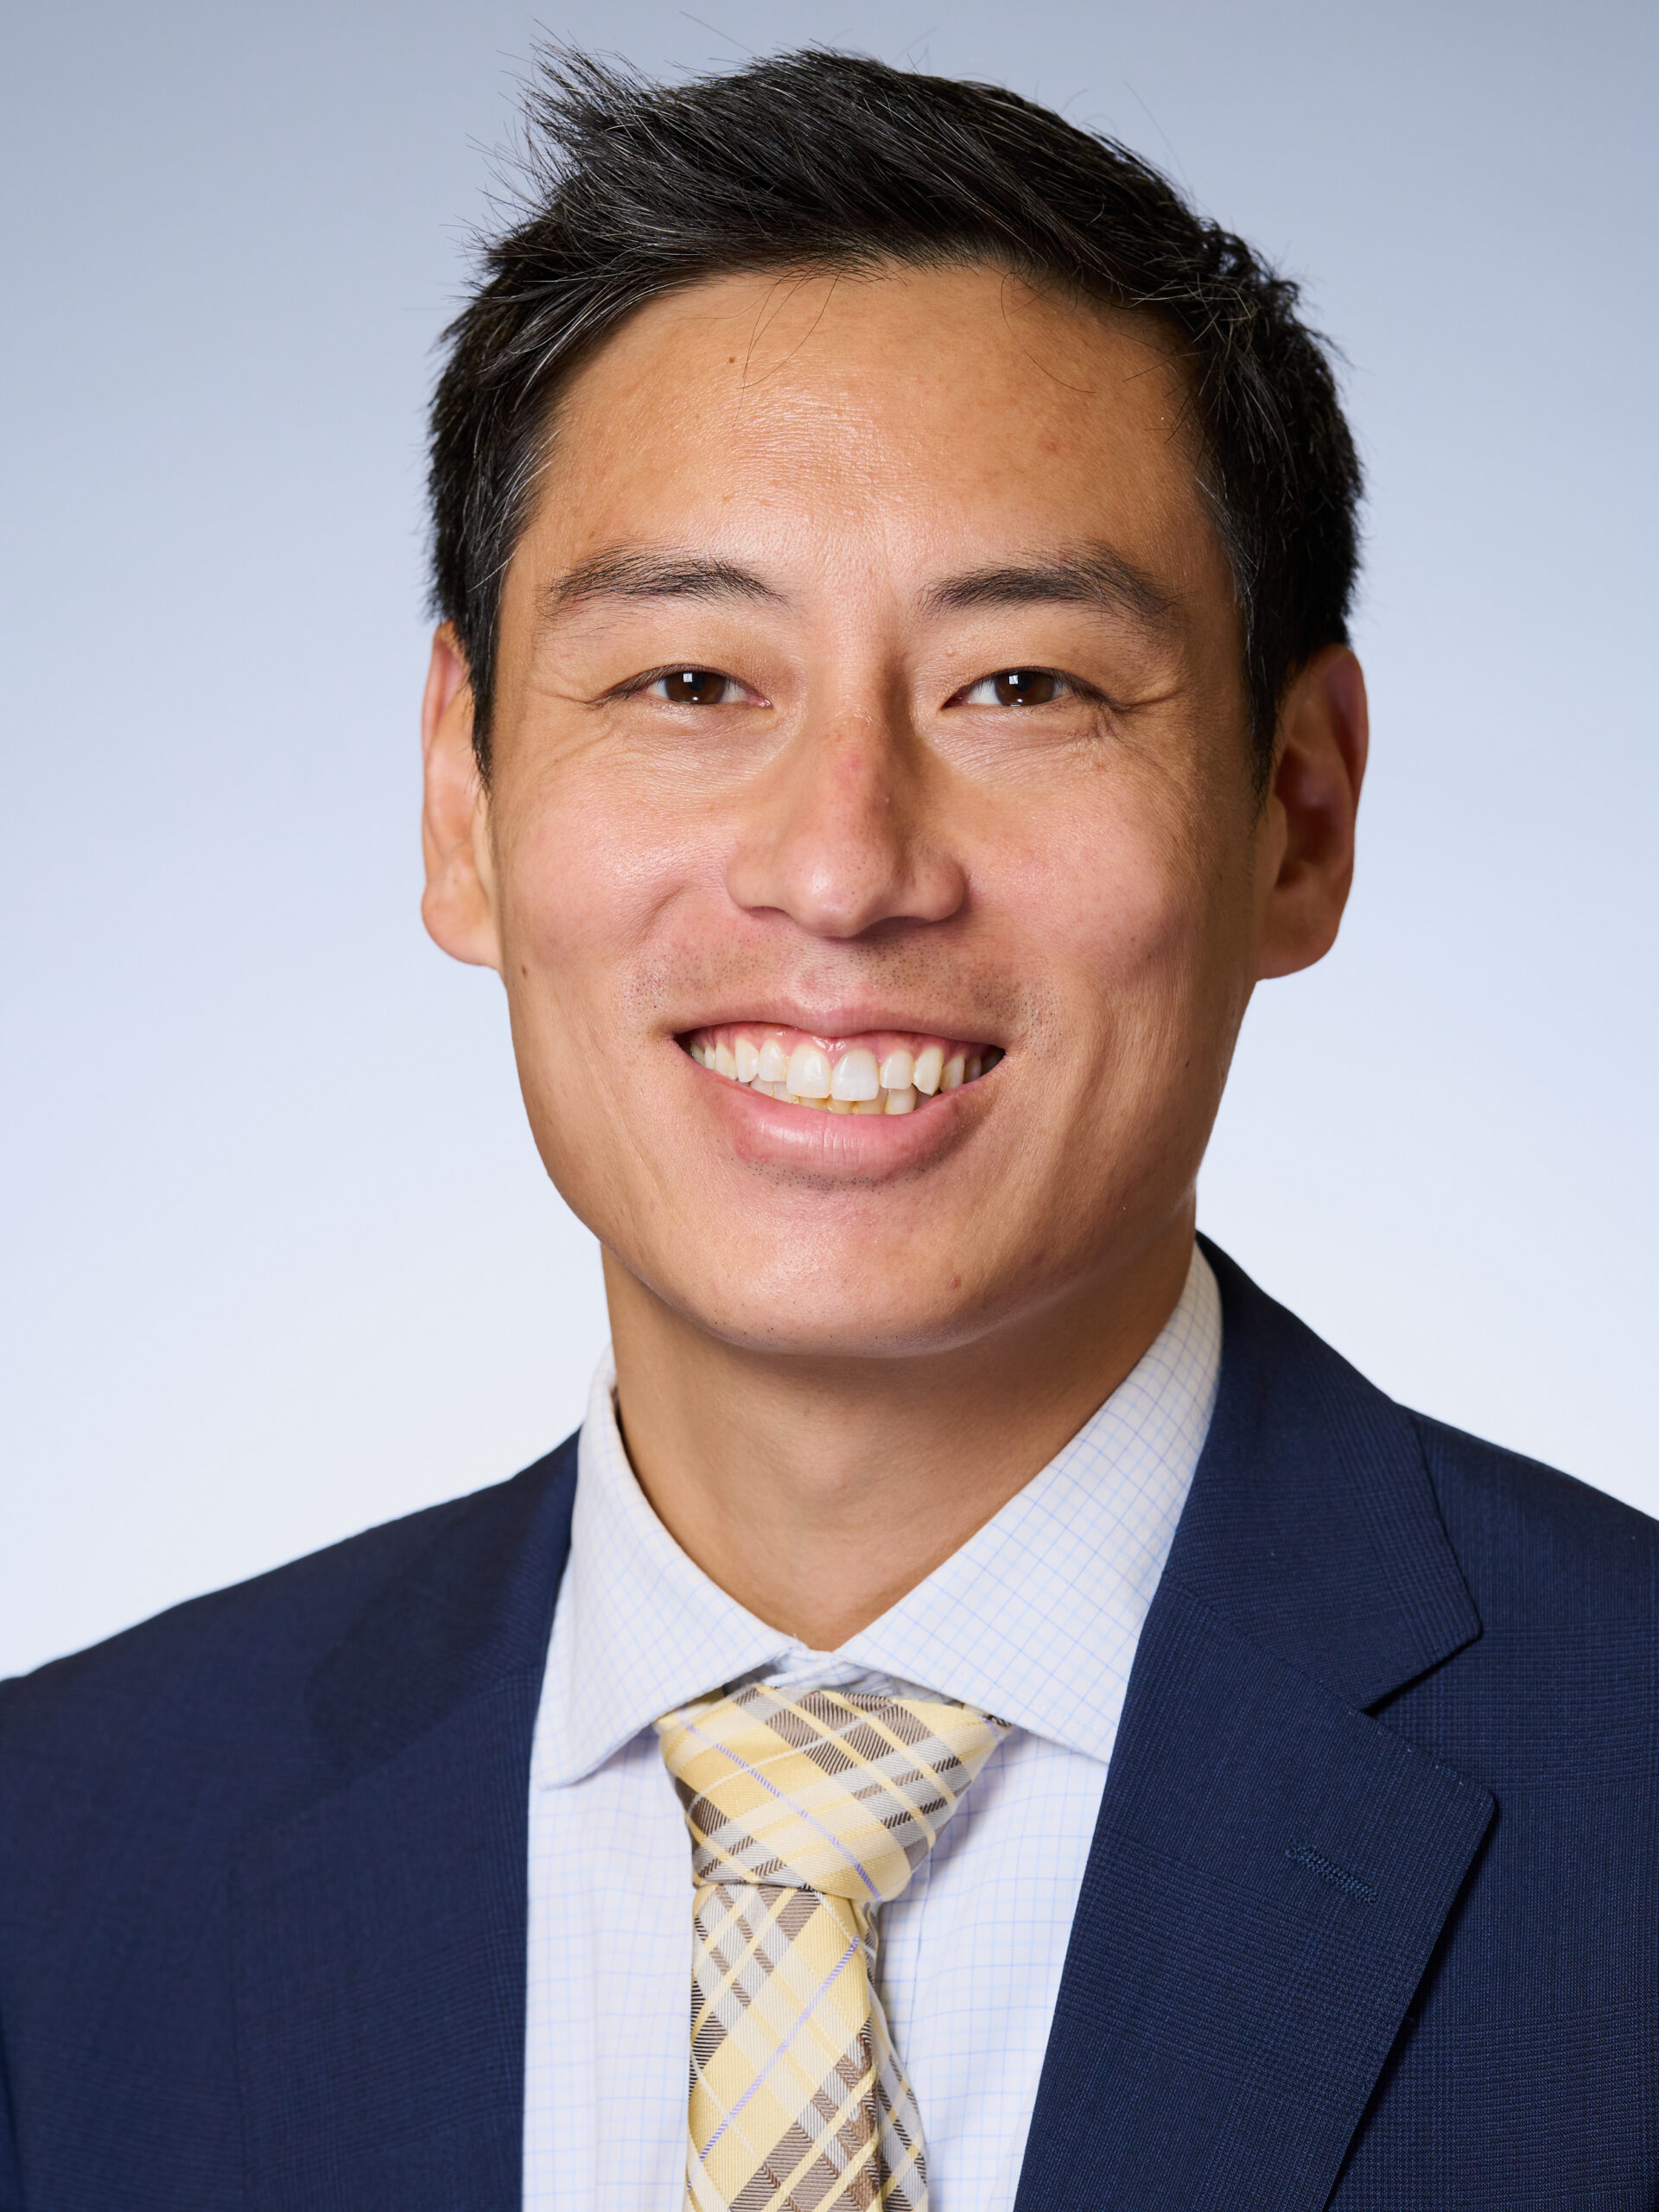 Hung-Jui (Ray) Tan, MD, MS Promoted to Associate Professor with Tenure